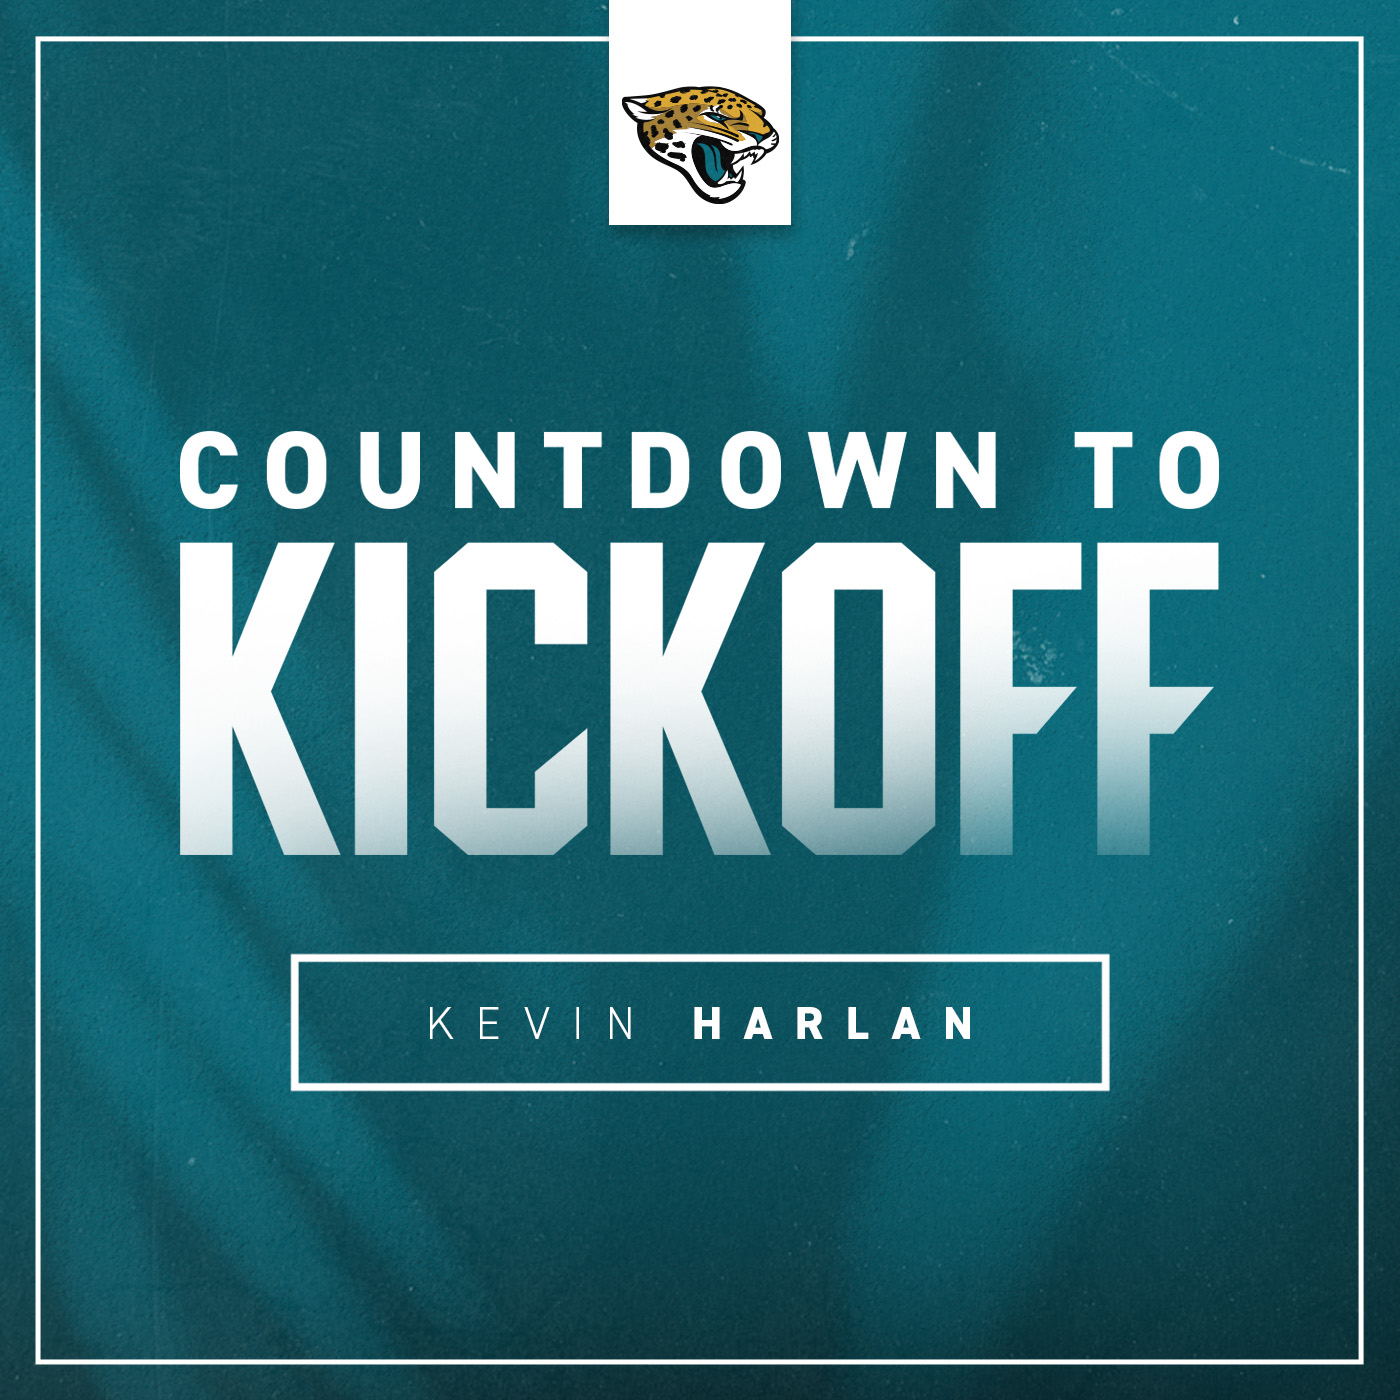 Kevin Harlan on what expect in playoffs vs. Andy Reid | Countdown to Kickoff